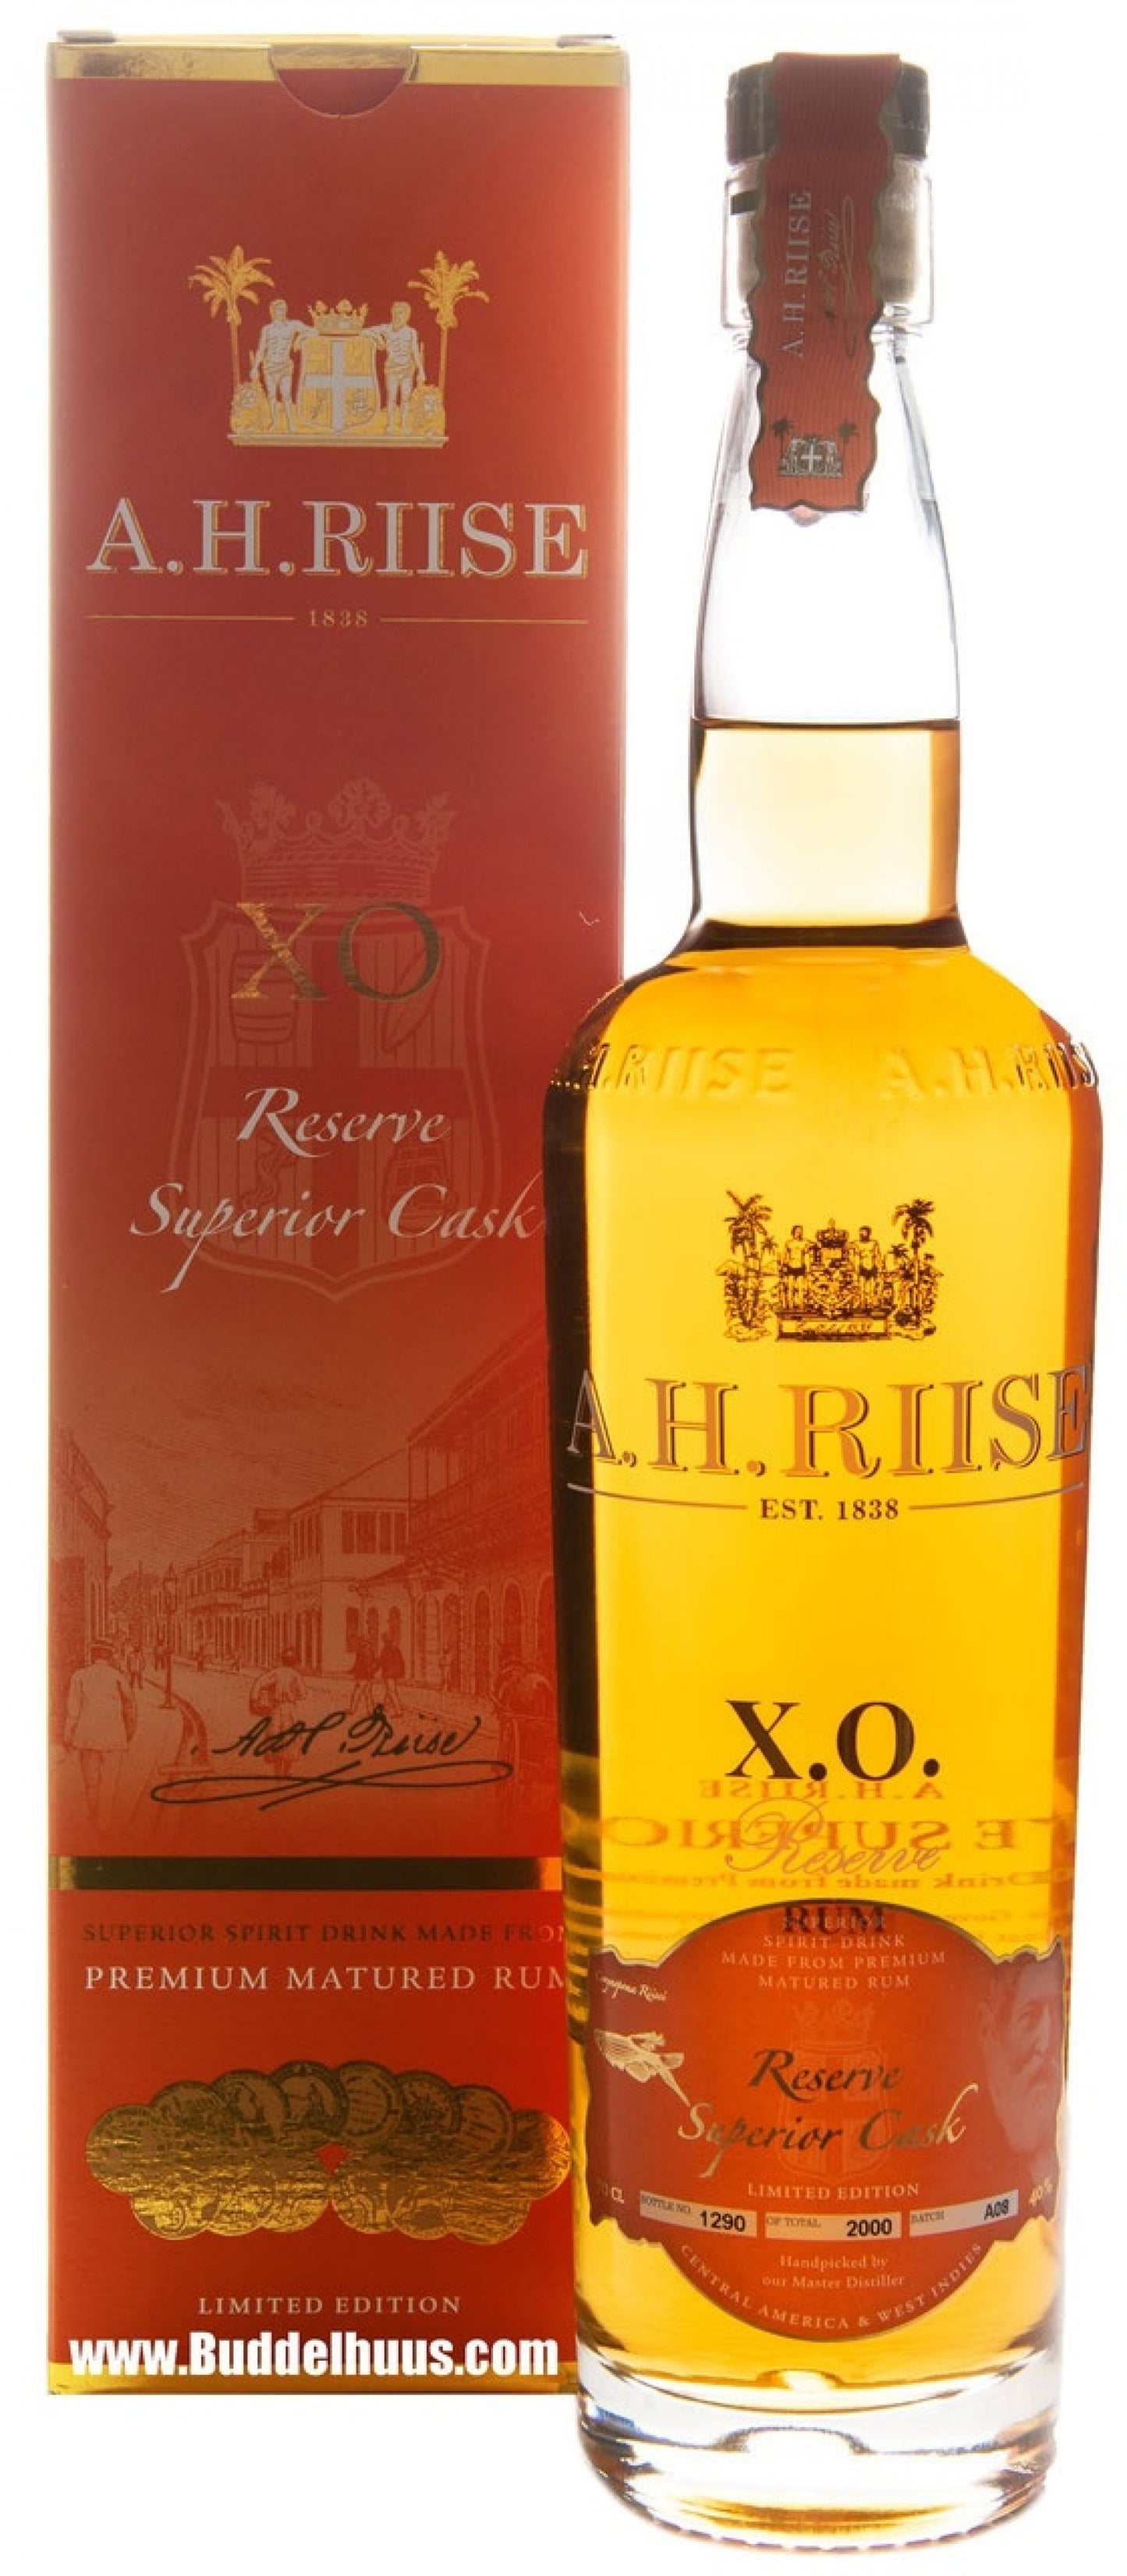 A.H. Riise XO Reserve Superior Cask